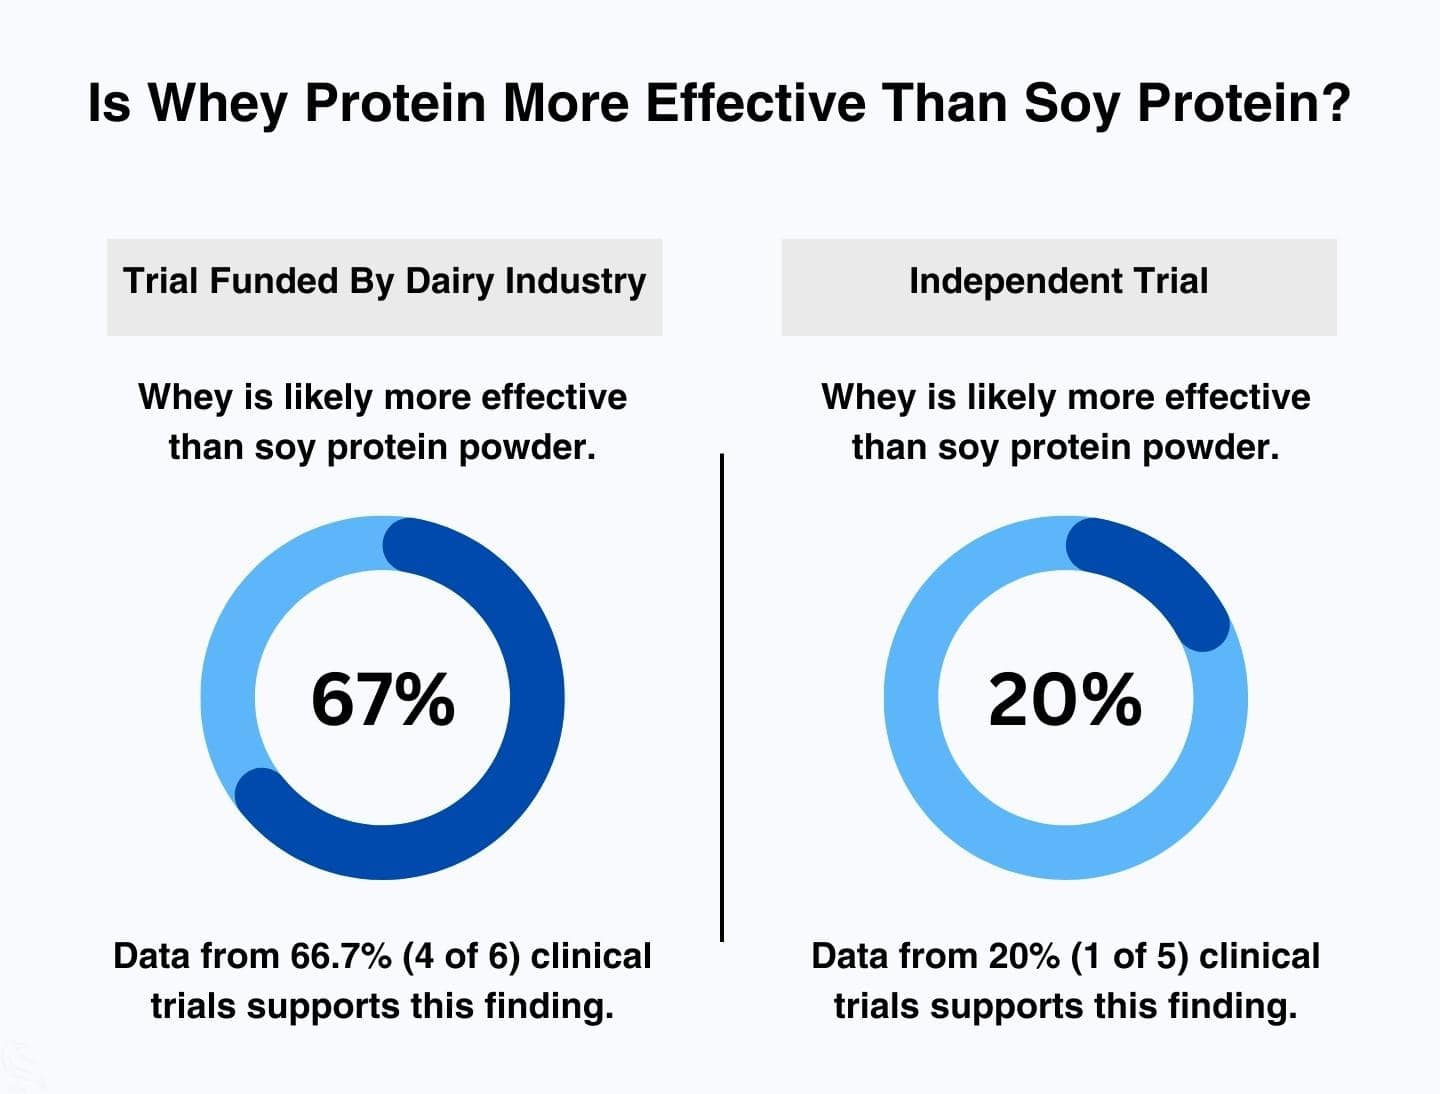 This image shows that whey protein is not superior to soy protein for building muscle in response to weighlifting in independent trials. Trials sponsored by the dairy industry are far more likely to conclude that whey is better than soy.